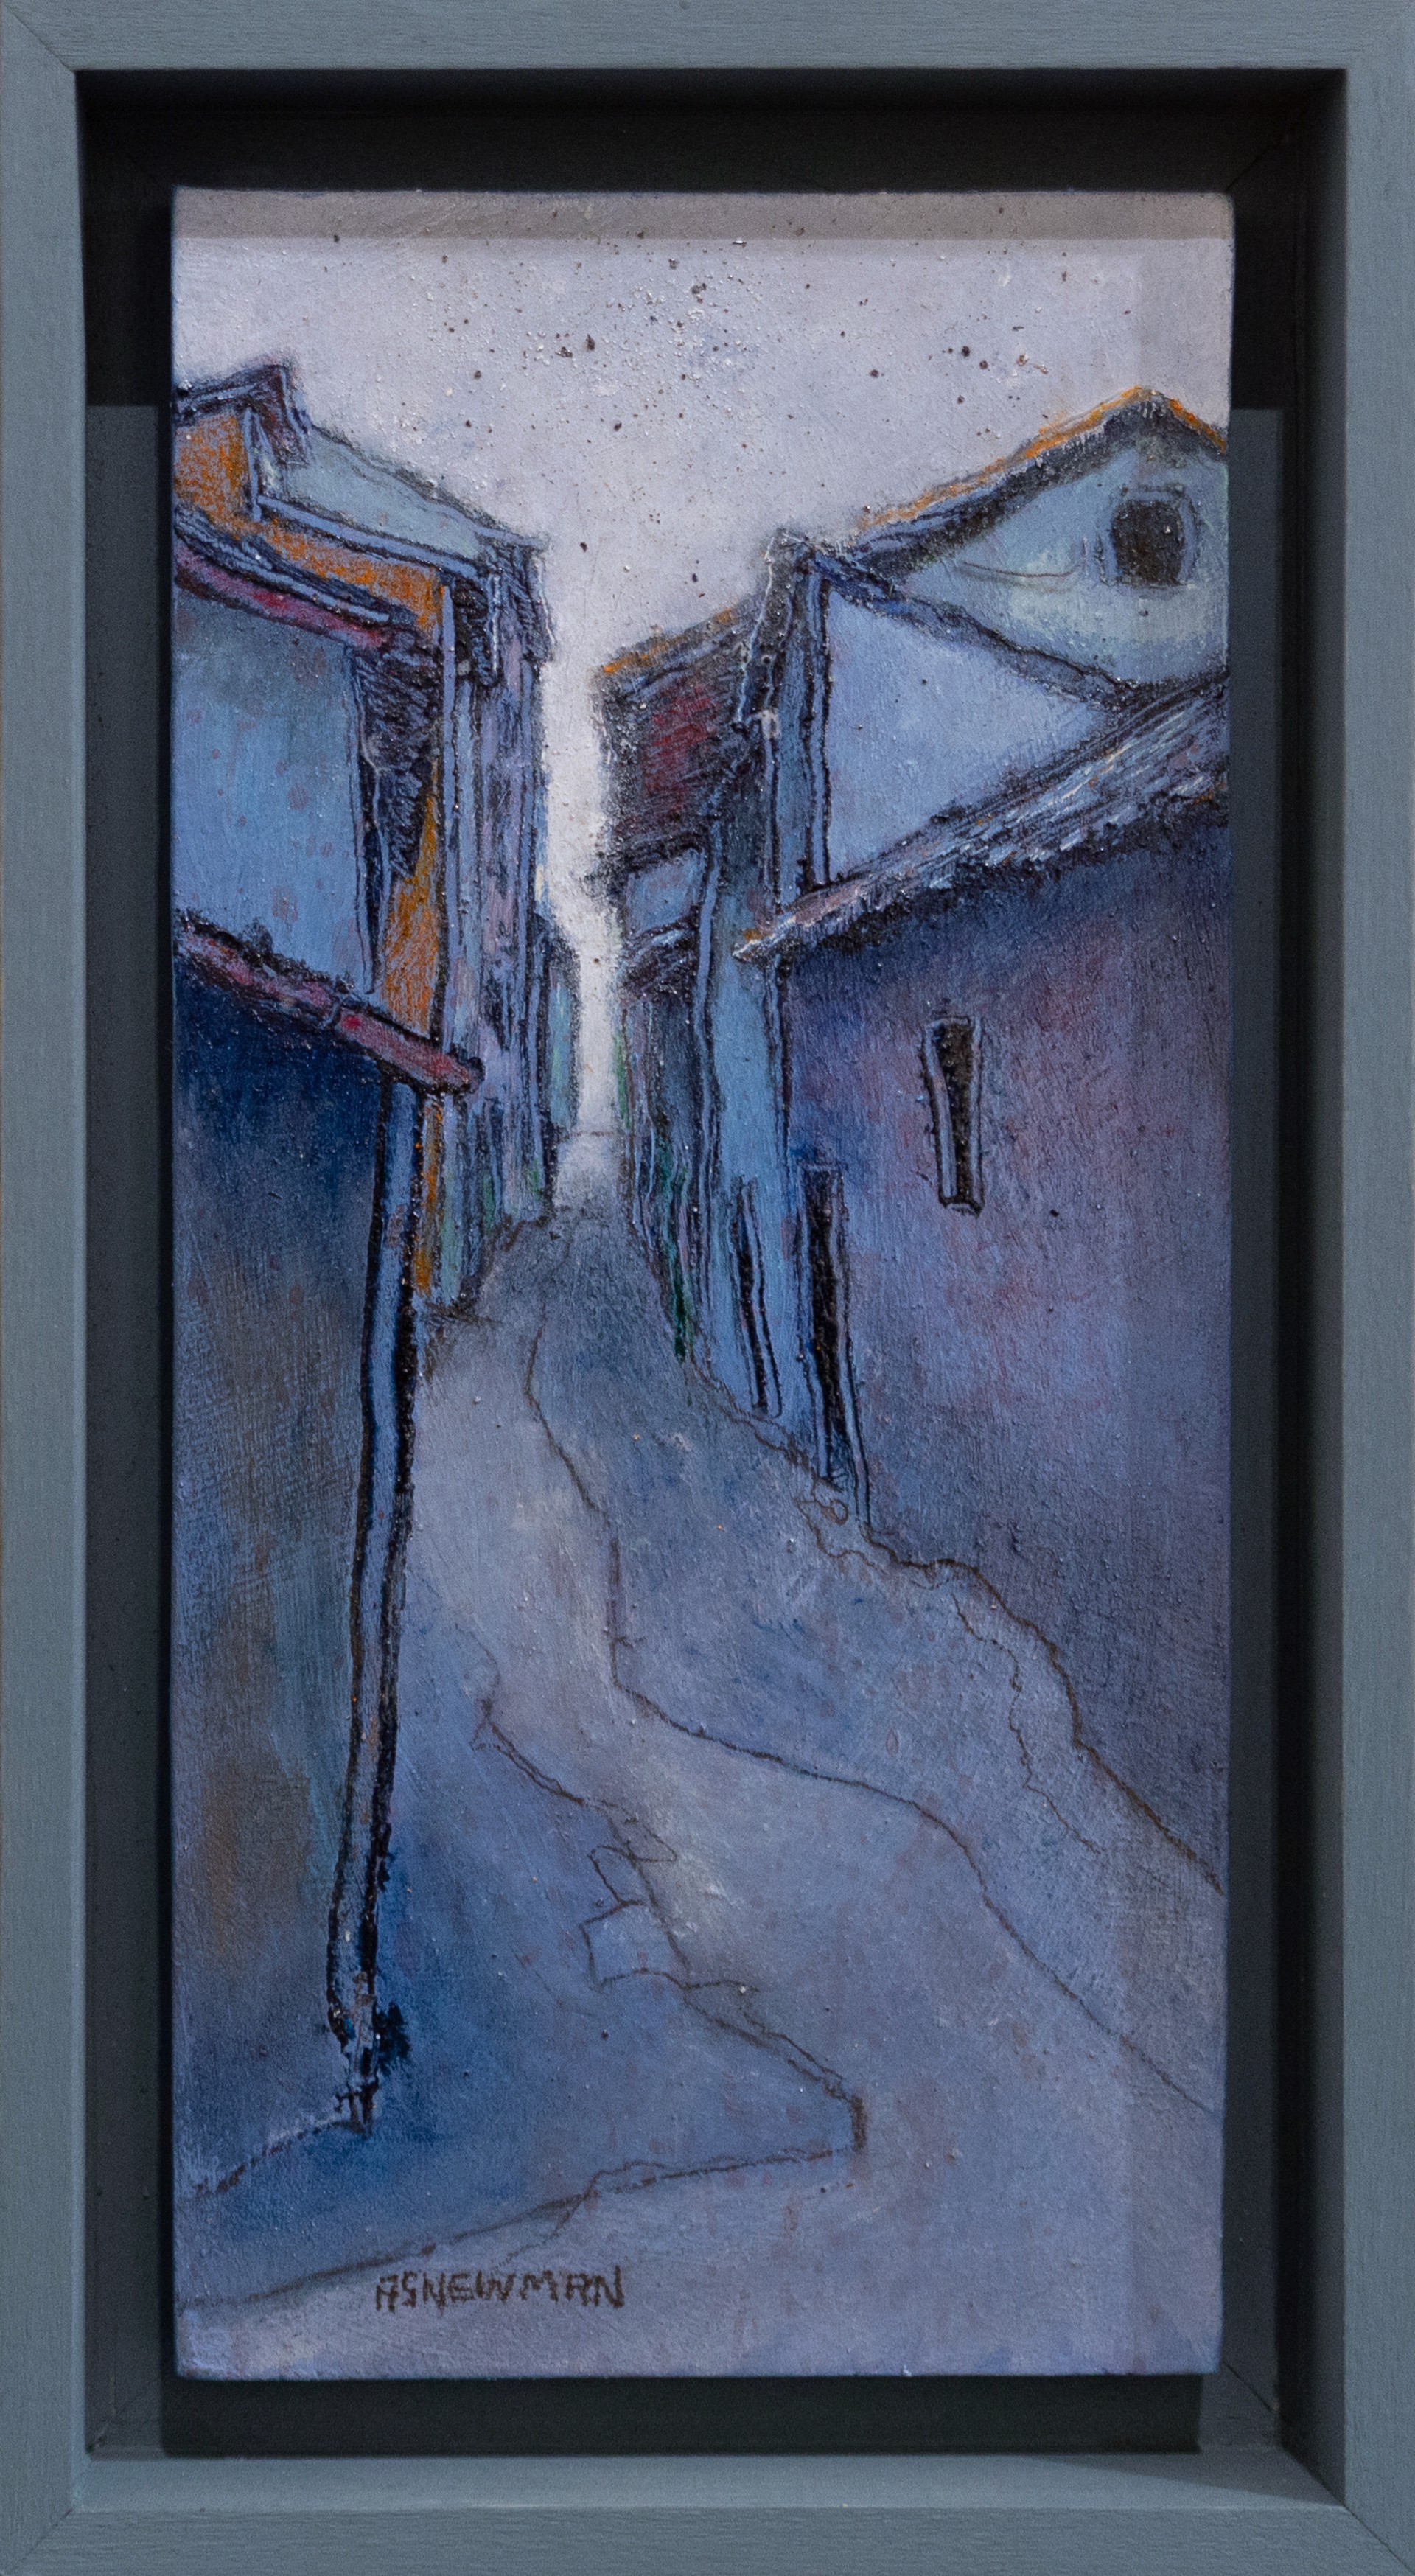 Passage (La Fresneda) 2 by Andy Newman